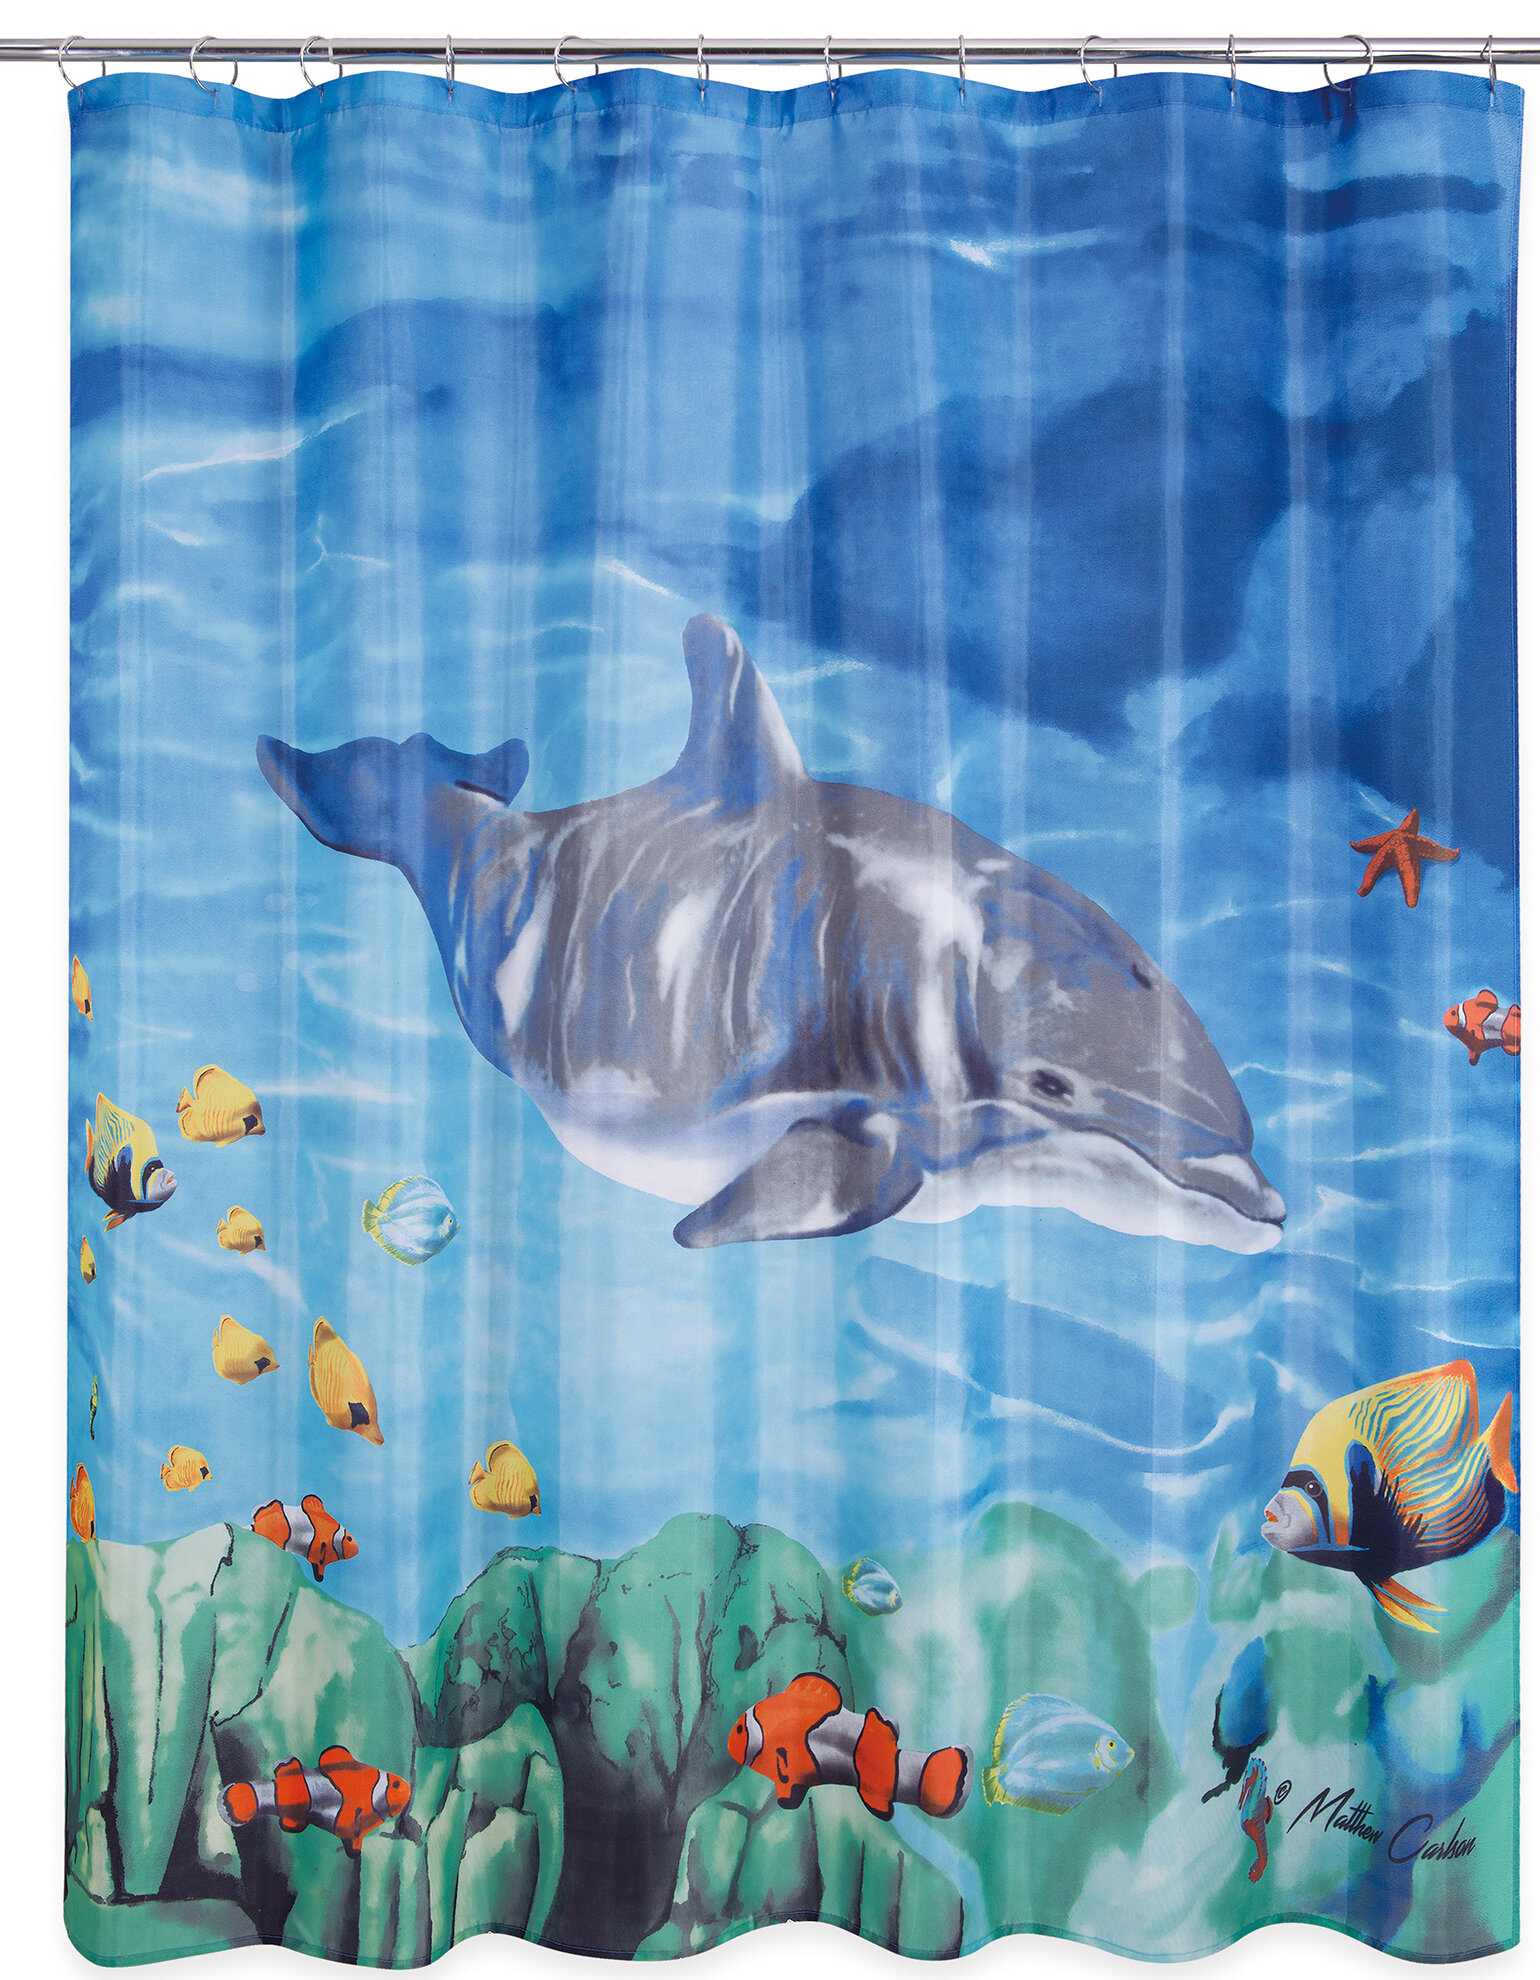 Dolphin mother and son Bathroom Shower Curtain Waterproof Fabric 12 Hooks new